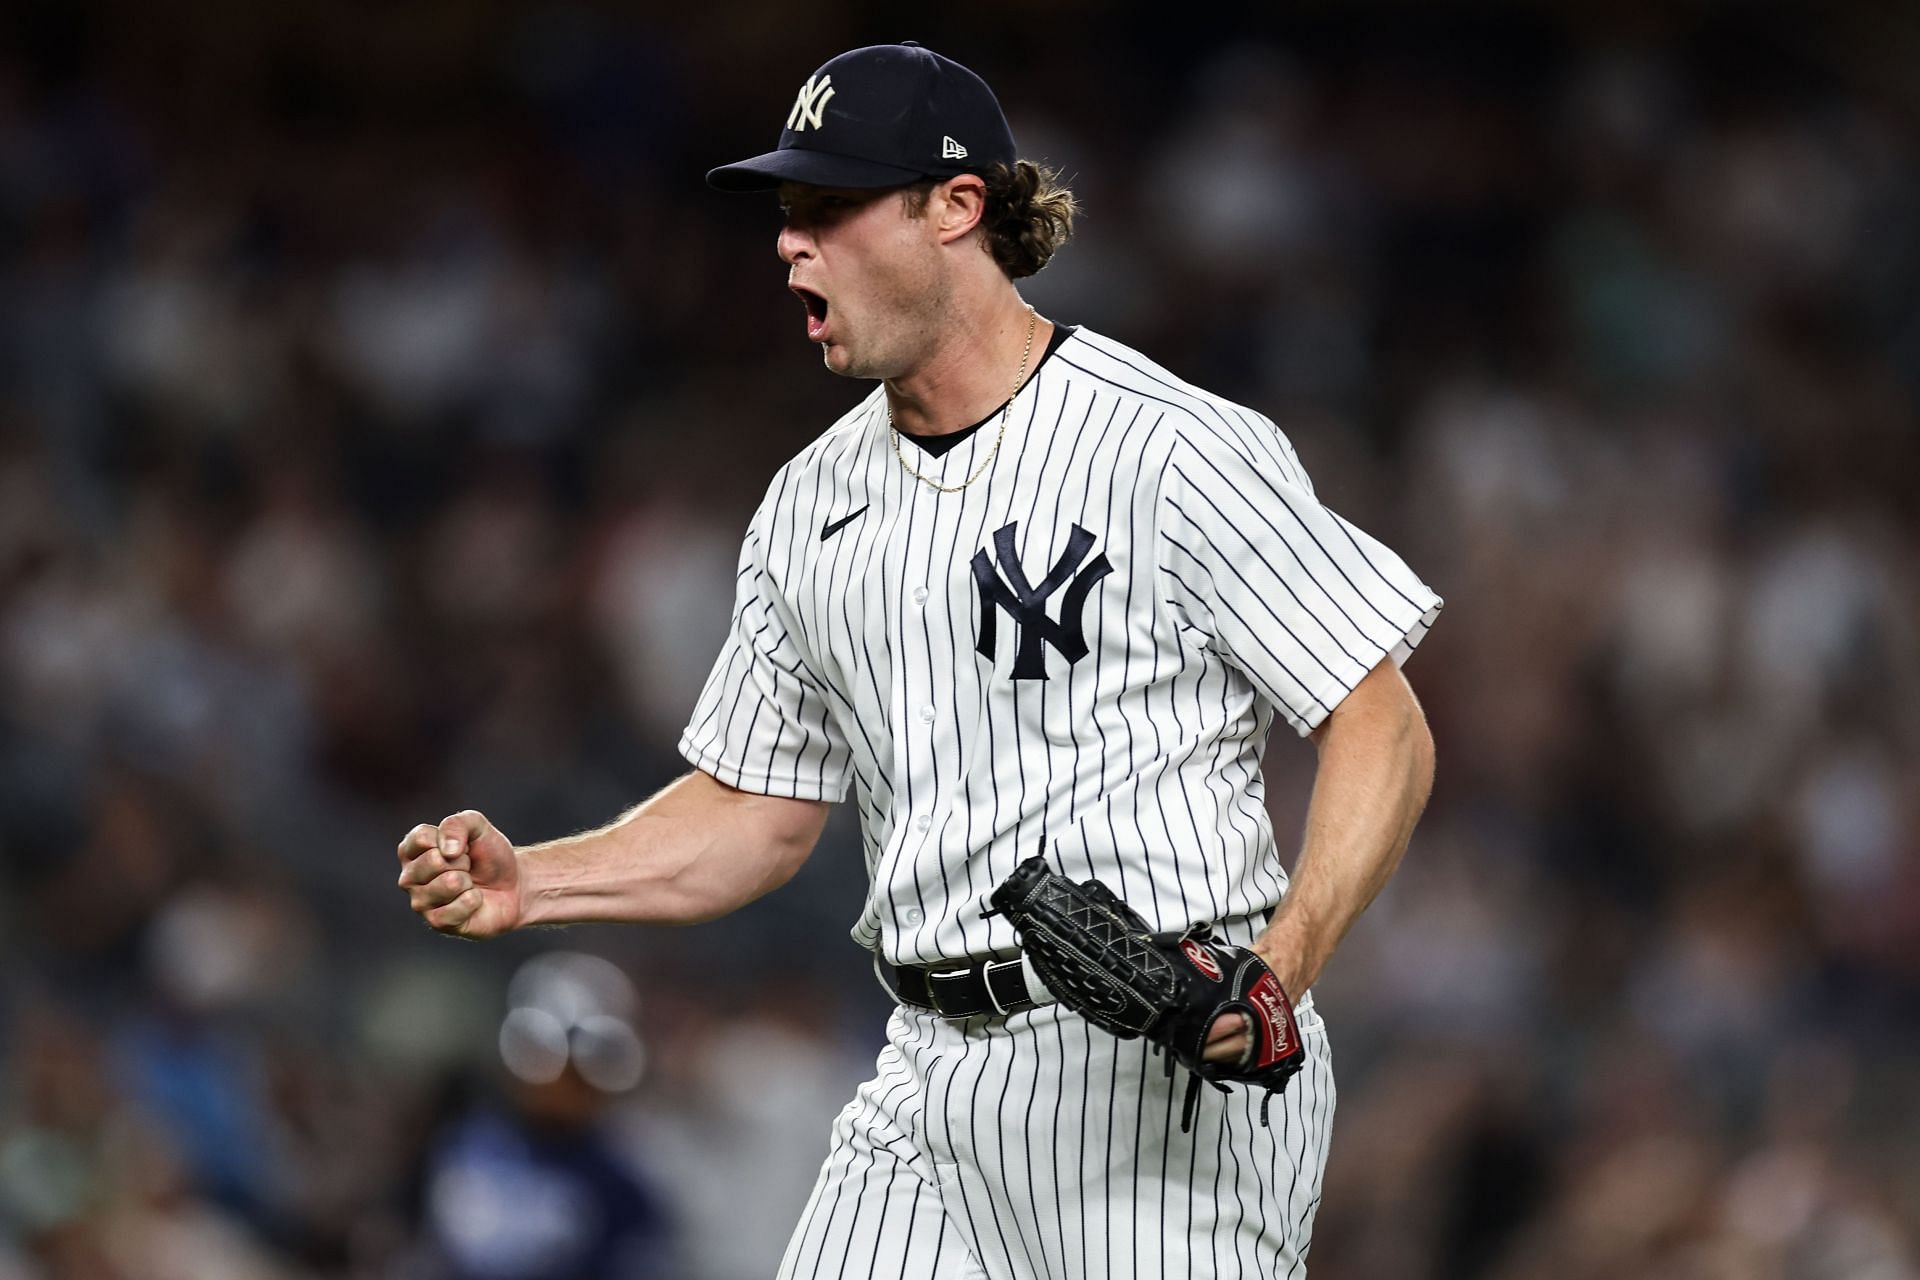 New York Yankees ace was on fire against the Tampa Bay Rays.